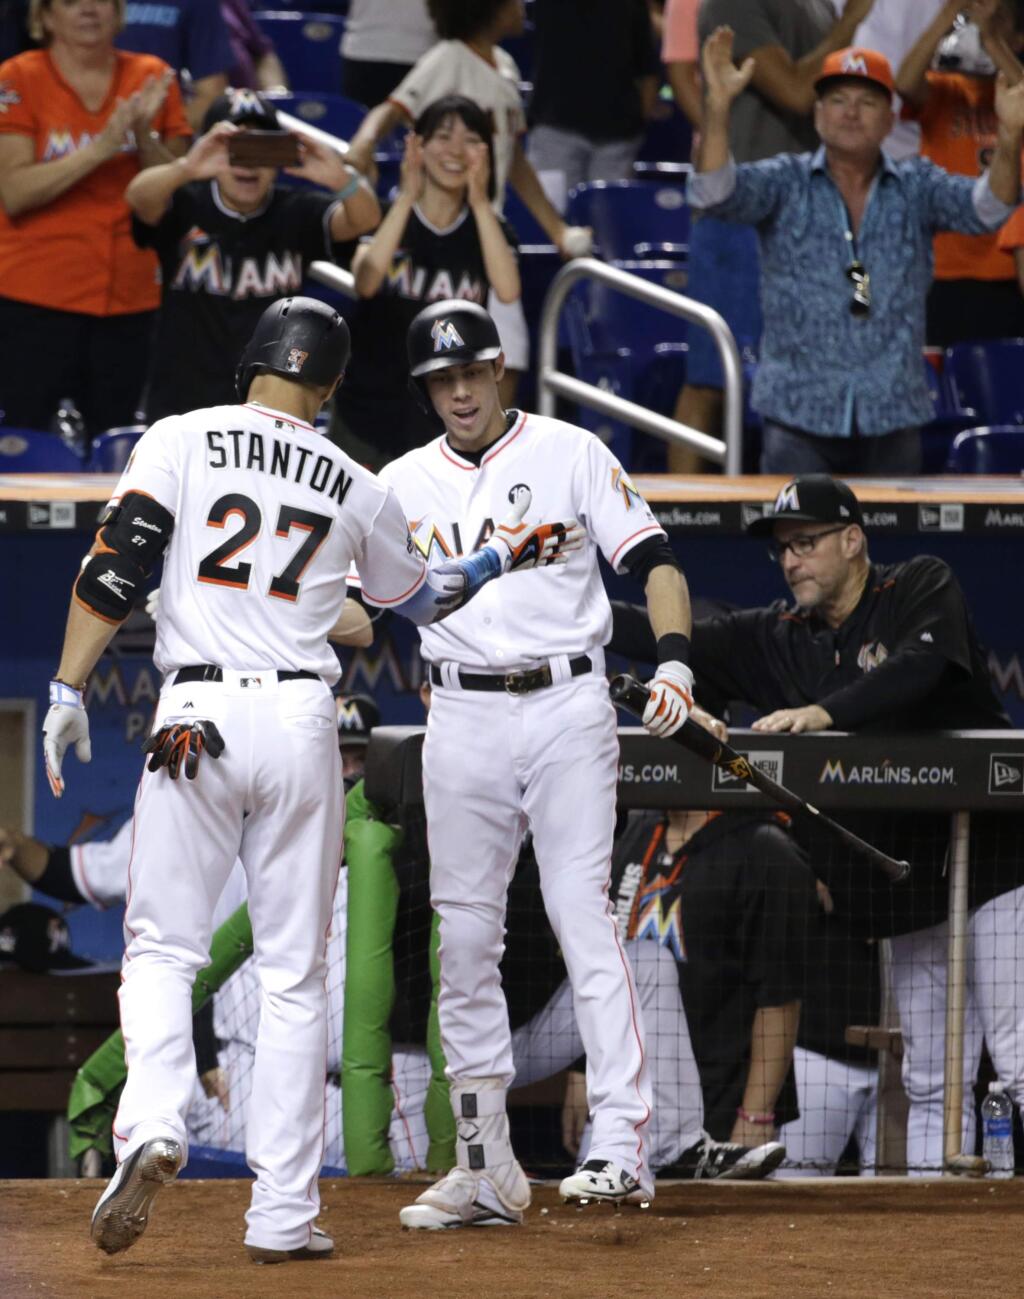 Miami Marlins' Giancarlo Stanton (27) is congratulated by Christian Yelich after hitting a solo home run during the third inning of a baseball game against the San Francisco Giants, Tuesday, Aug. 15, 2017, in Miami. (AP Photo/Lynne Sladky)